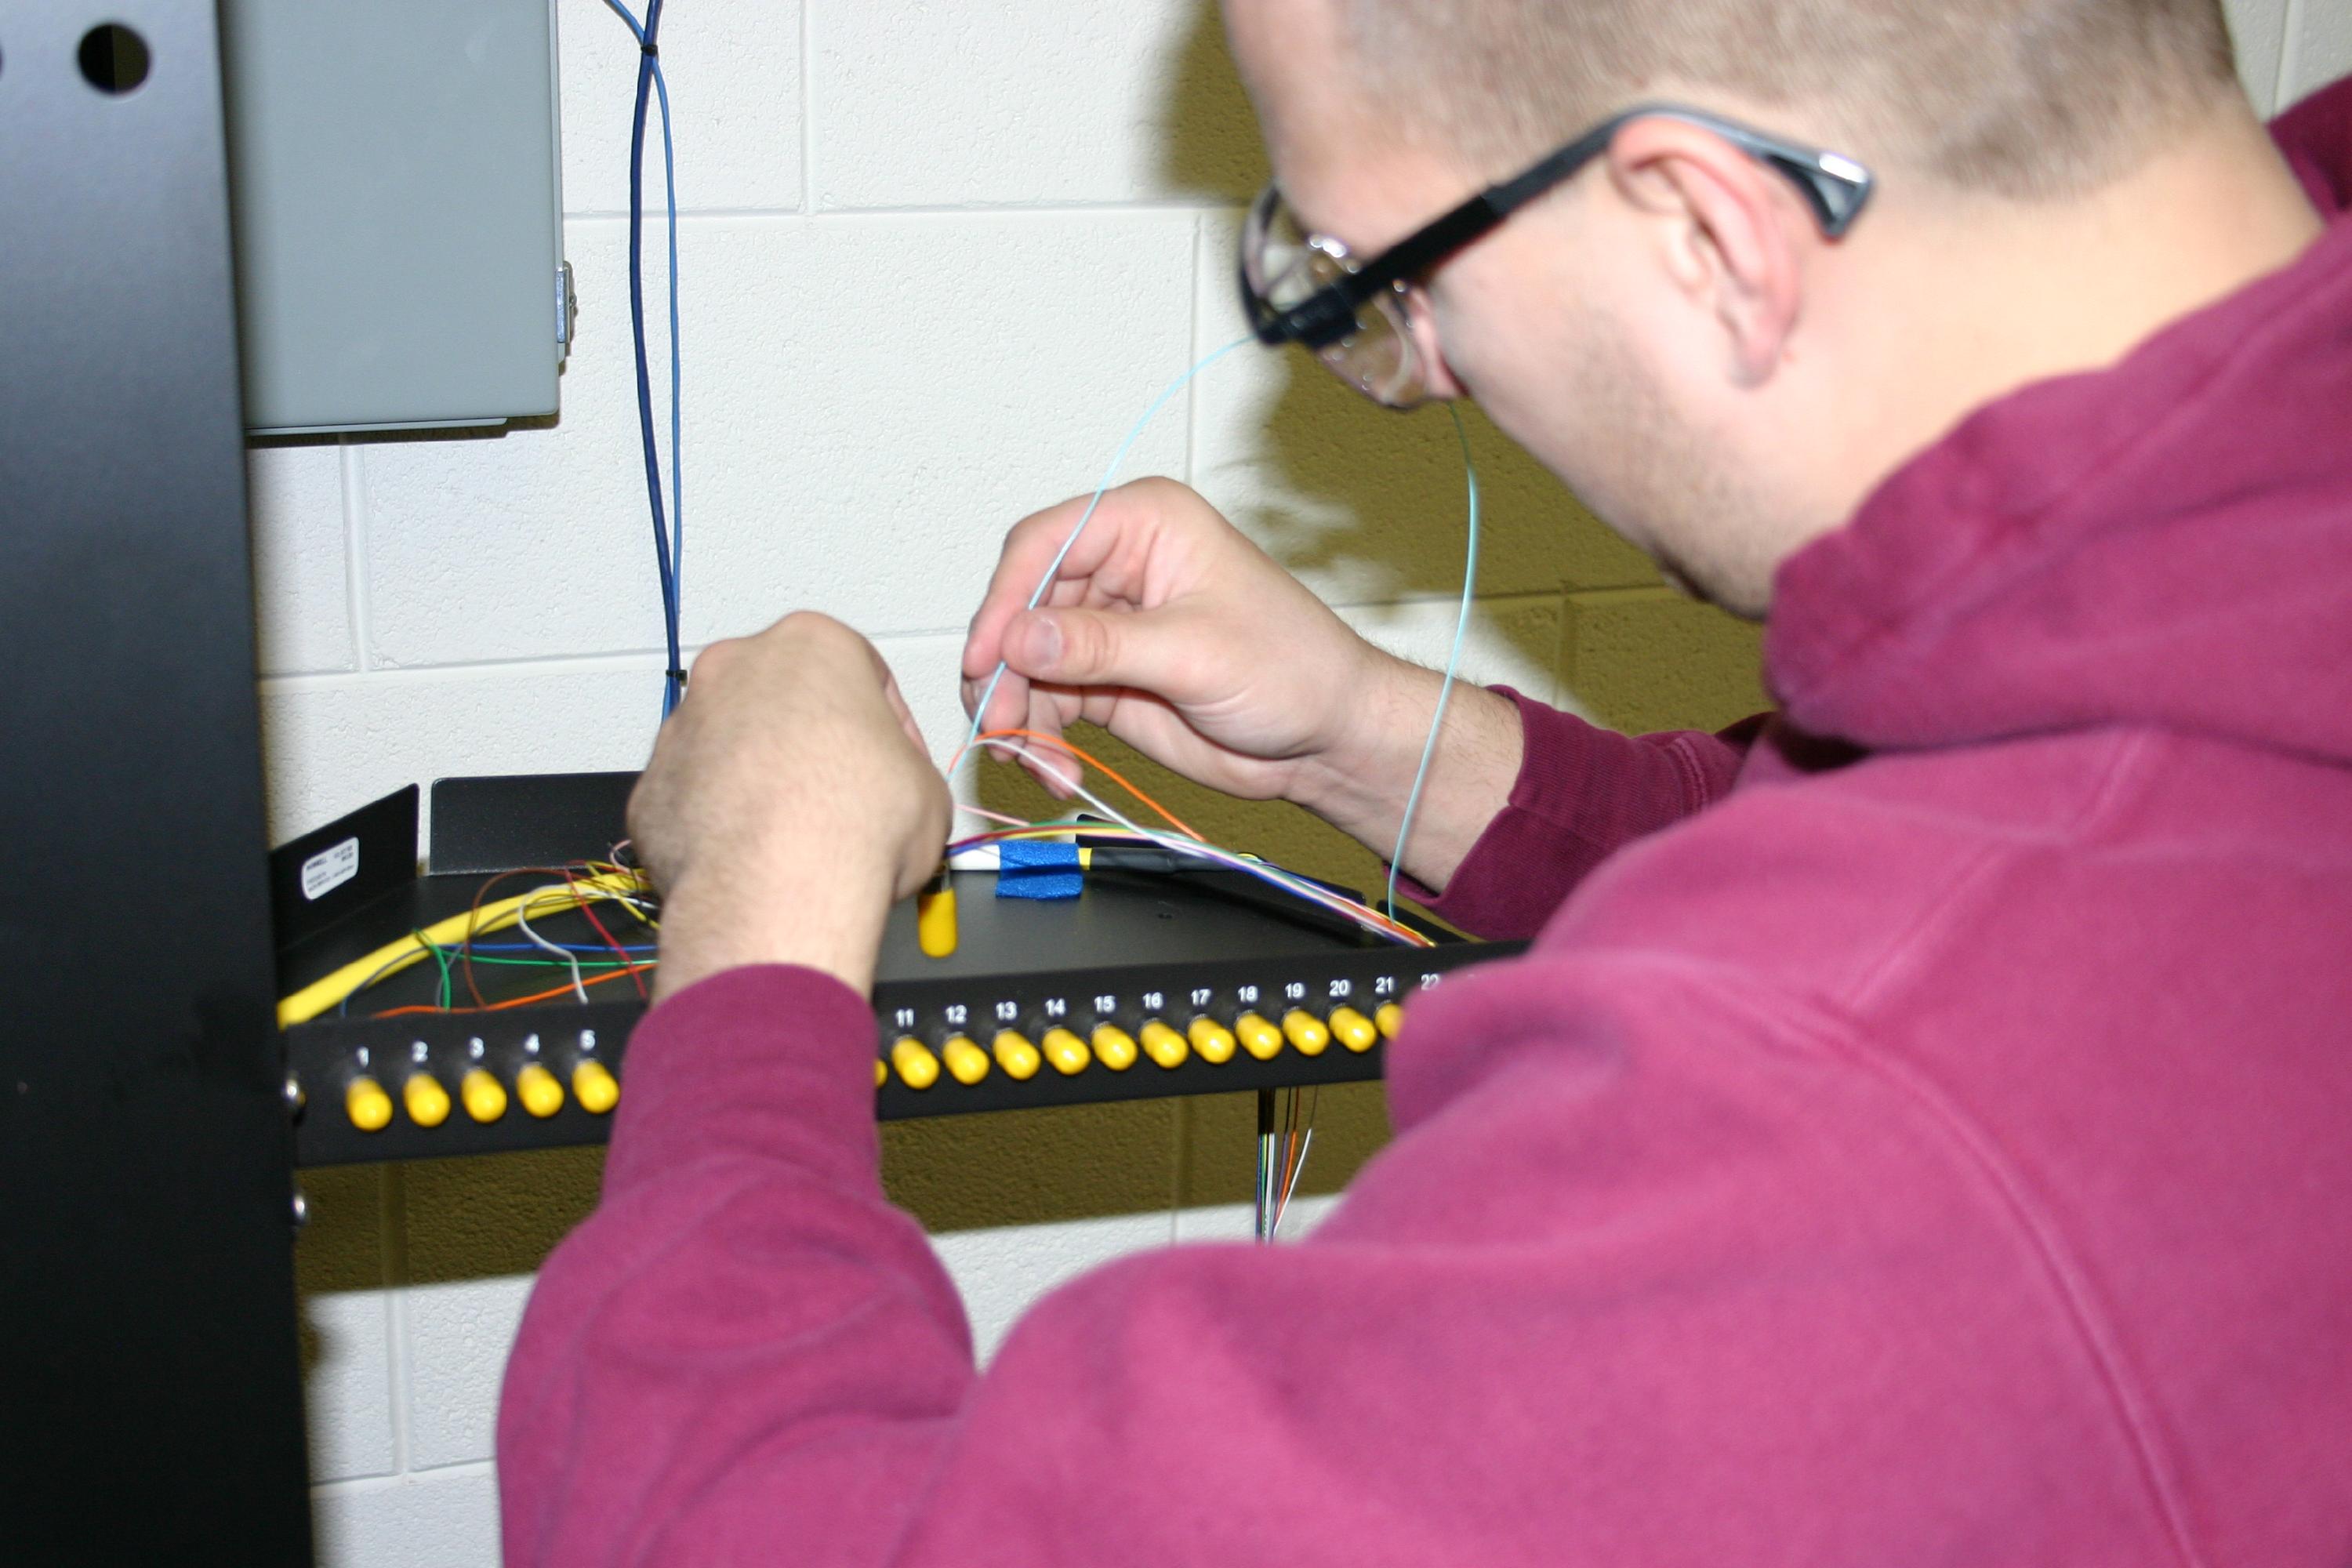 Student working with network cables